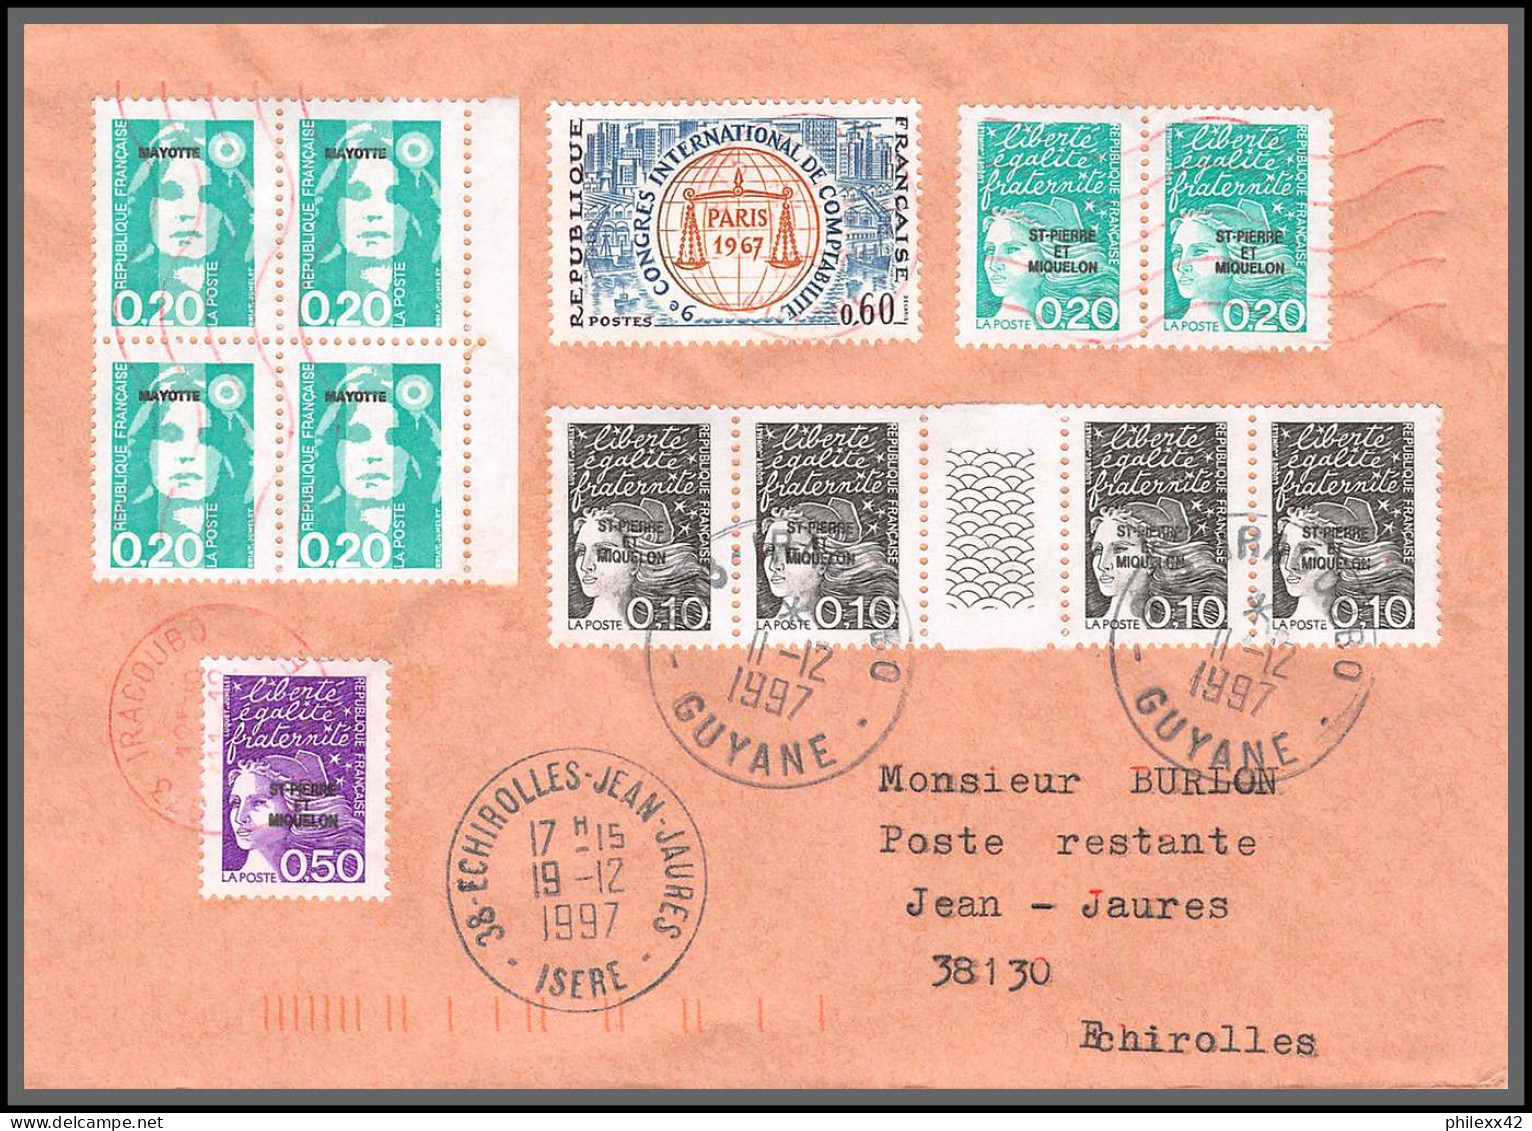 74486 Mixte Briat Luquet Mayotte St Pierre 11/12/1997 Iracoubo Guyane Echirolles Isère Lettre Cover Colonies - 1997-2004 Marianne Of July 14th